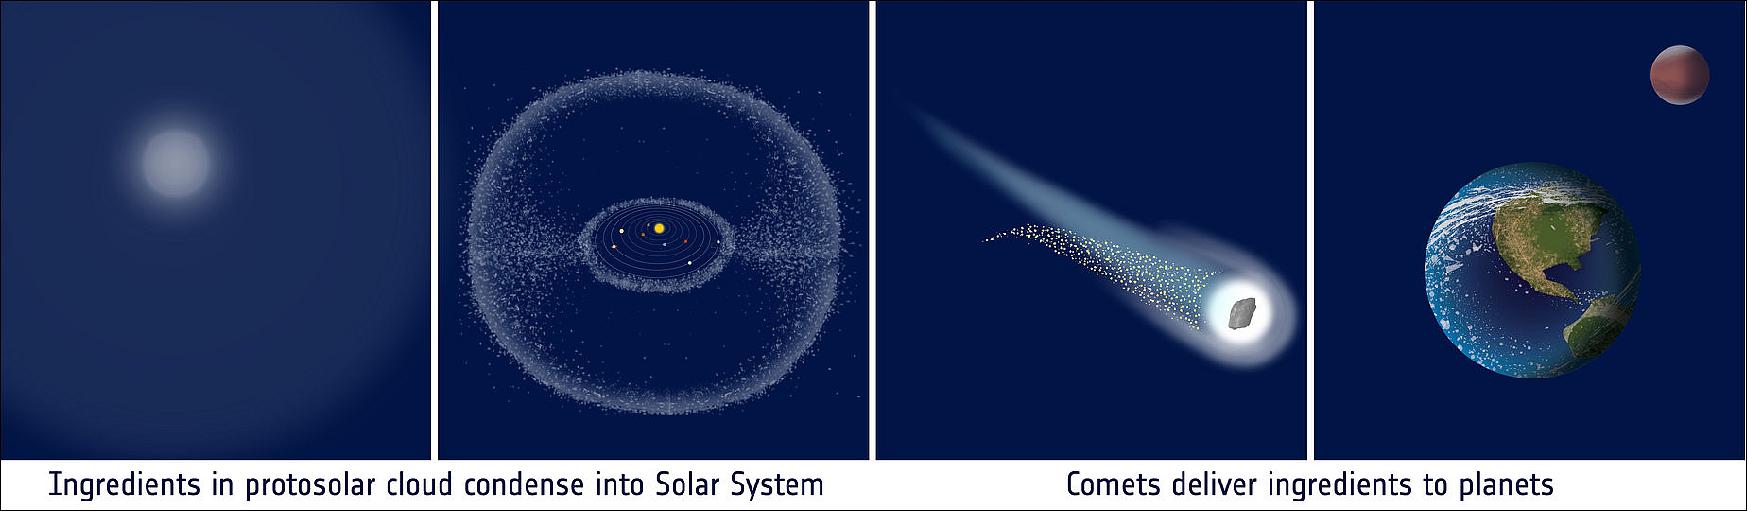 Figure 49: Our Solar System condensed from a cloud of gas and dust over 4.6 billion years ago. As the newborn planets settled in their orbits, gravitational perturbations are thought to have disrupted swarms of comets into the inner Solar System, impacting the rocky planets. As well as inheriting ingredients during the planet-forming process itself, comets are also believed to have delivered some of the basic ingredients for life to Earth, leading to life as we know it today (image credit: ESA) 82)